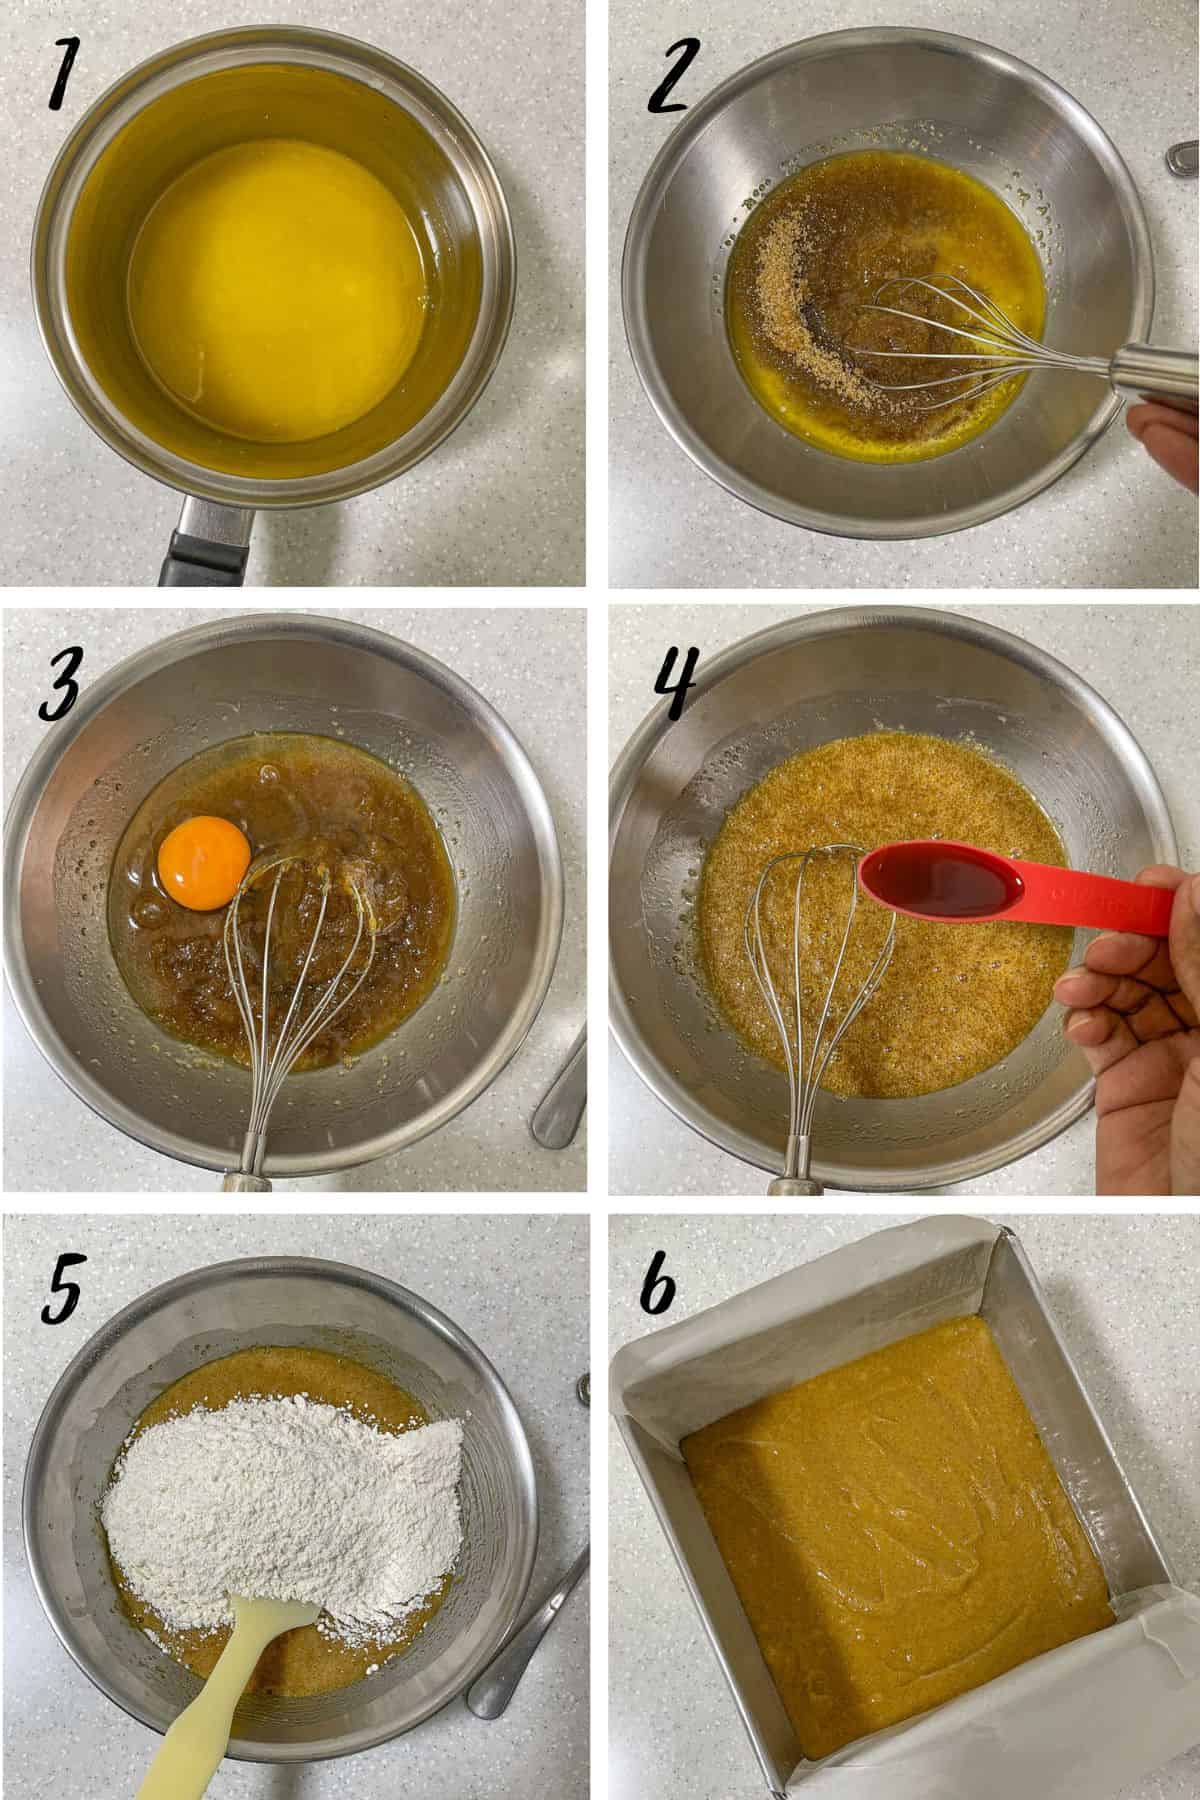 A poster of 6 images showing how to make blondies.